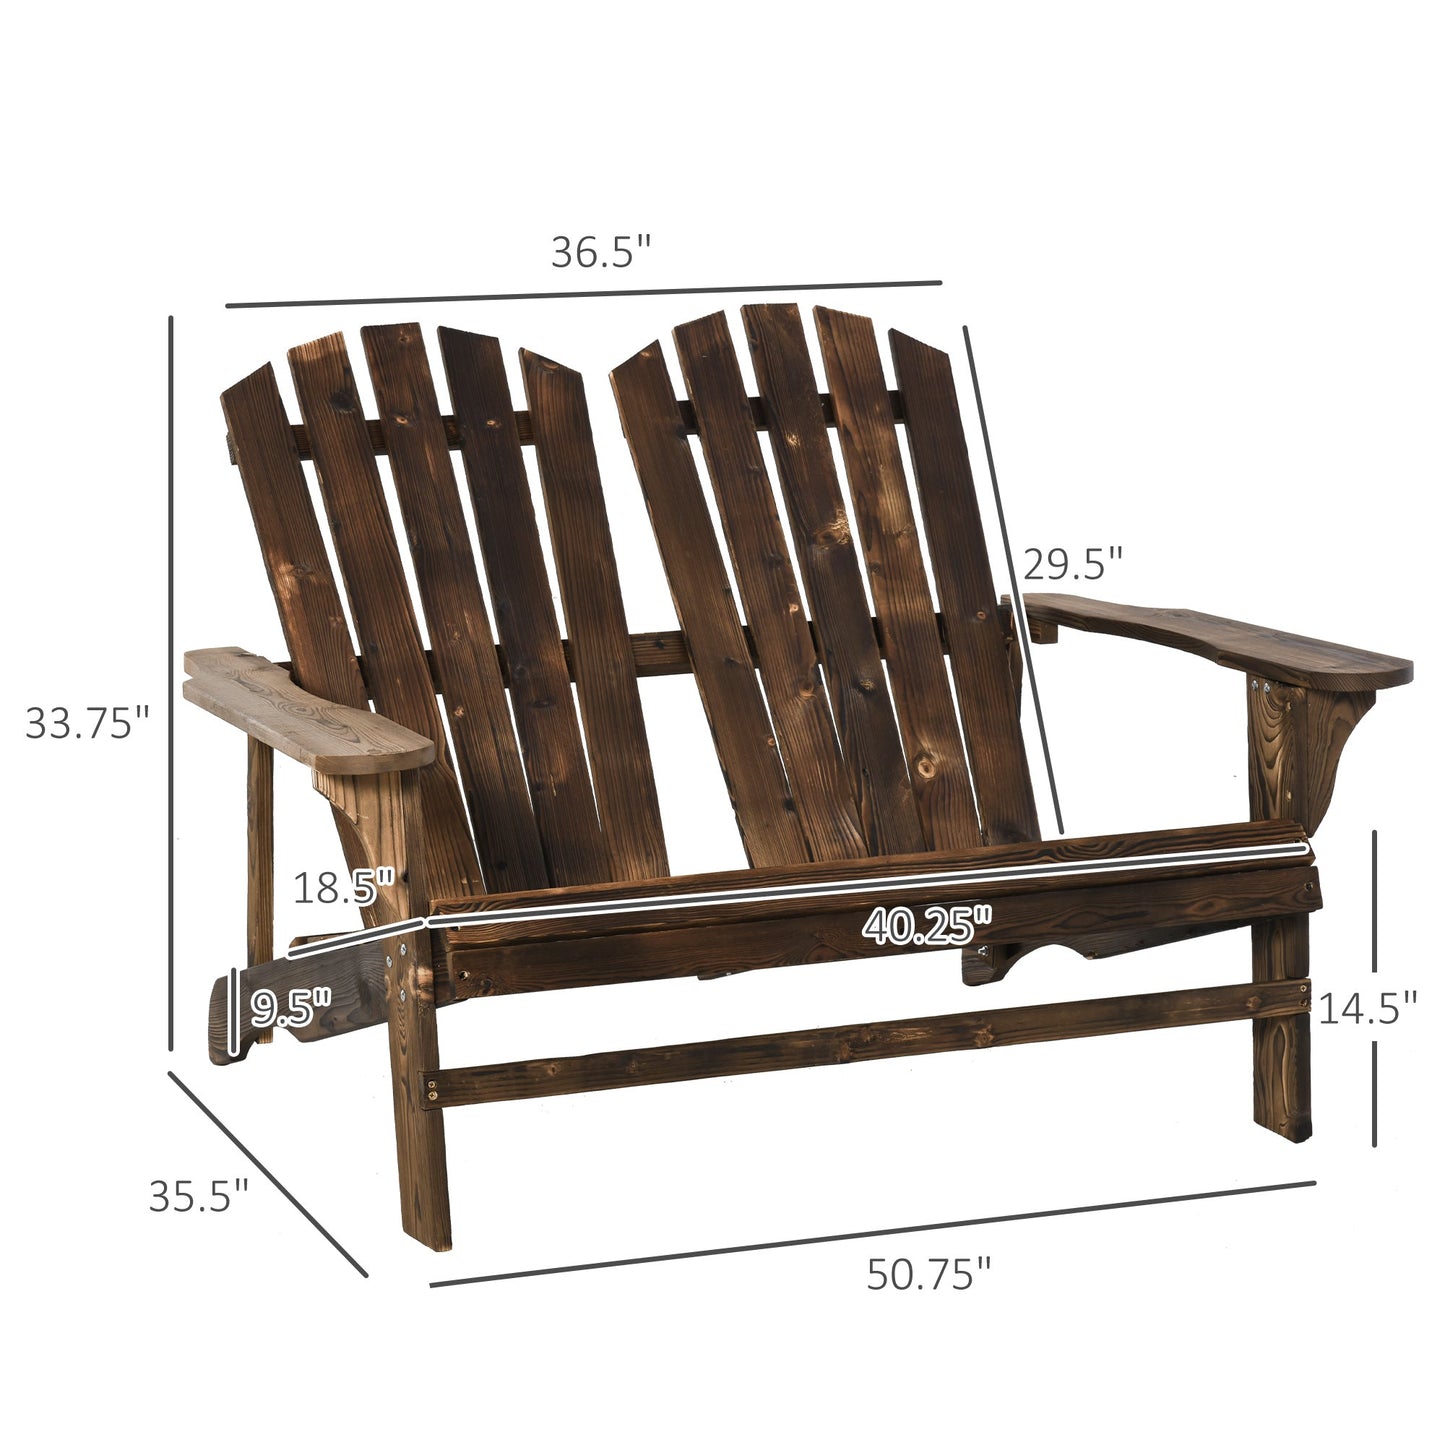 Outdoor and Garden-Outdoor Adirondack Chair, Wooden Loveseat Bench, Lounger Armchair with Flat Back for Garden, Deck, Patio, Fire Pit, Brown - Outdoor Style Company